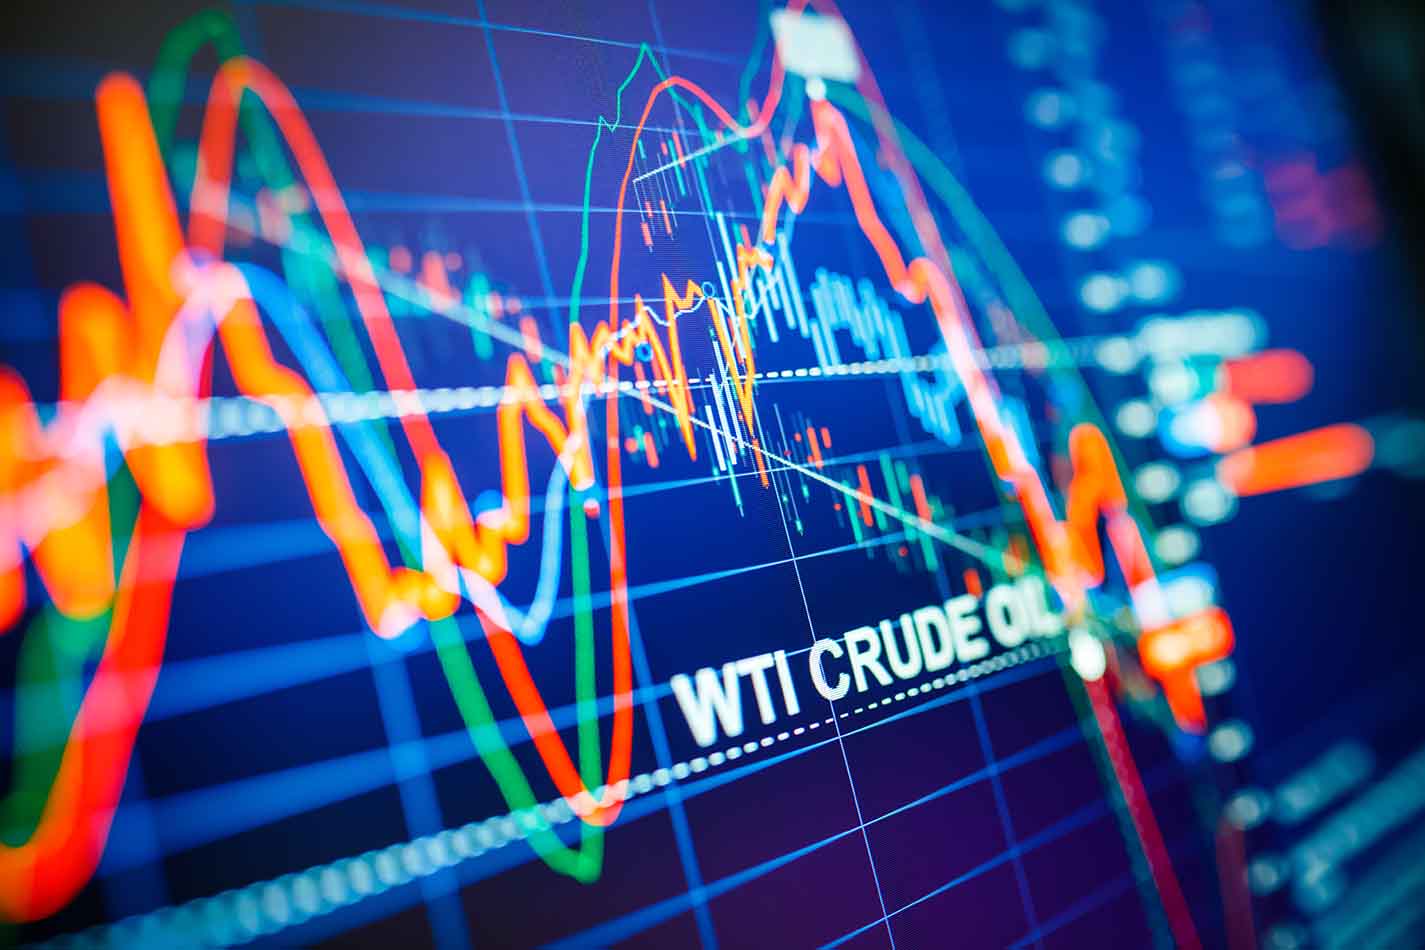 Oil fell by 5% due to the uncertain pace of recovery in China and the increase in inventories in the US